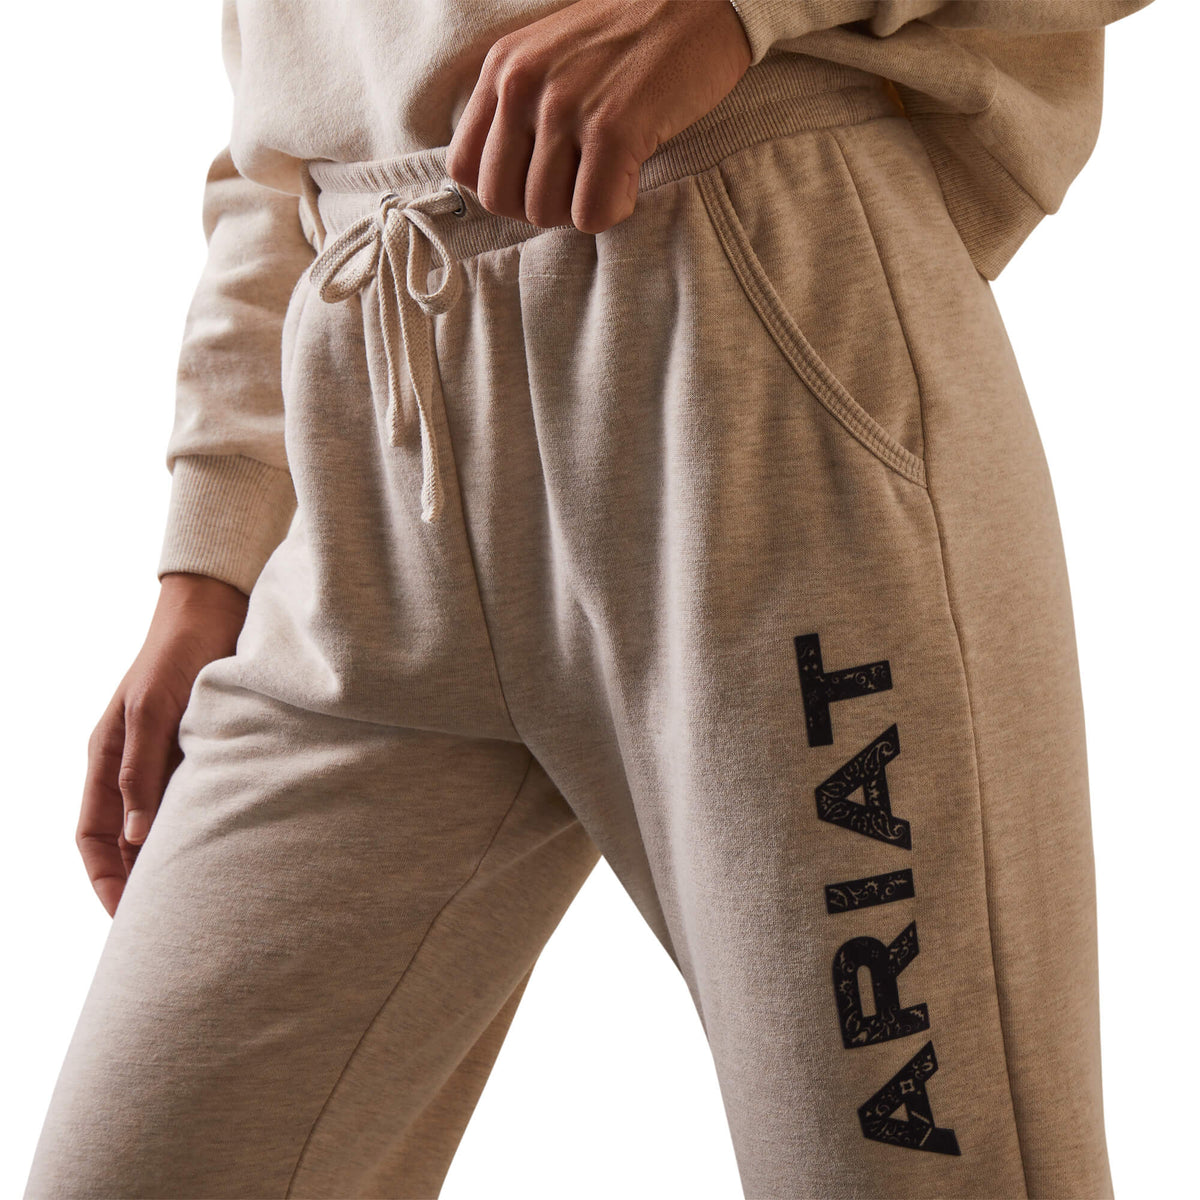 Ariat Women's Real Jogger Sweatpants-Oatmeal Heather – Branded Country Wear